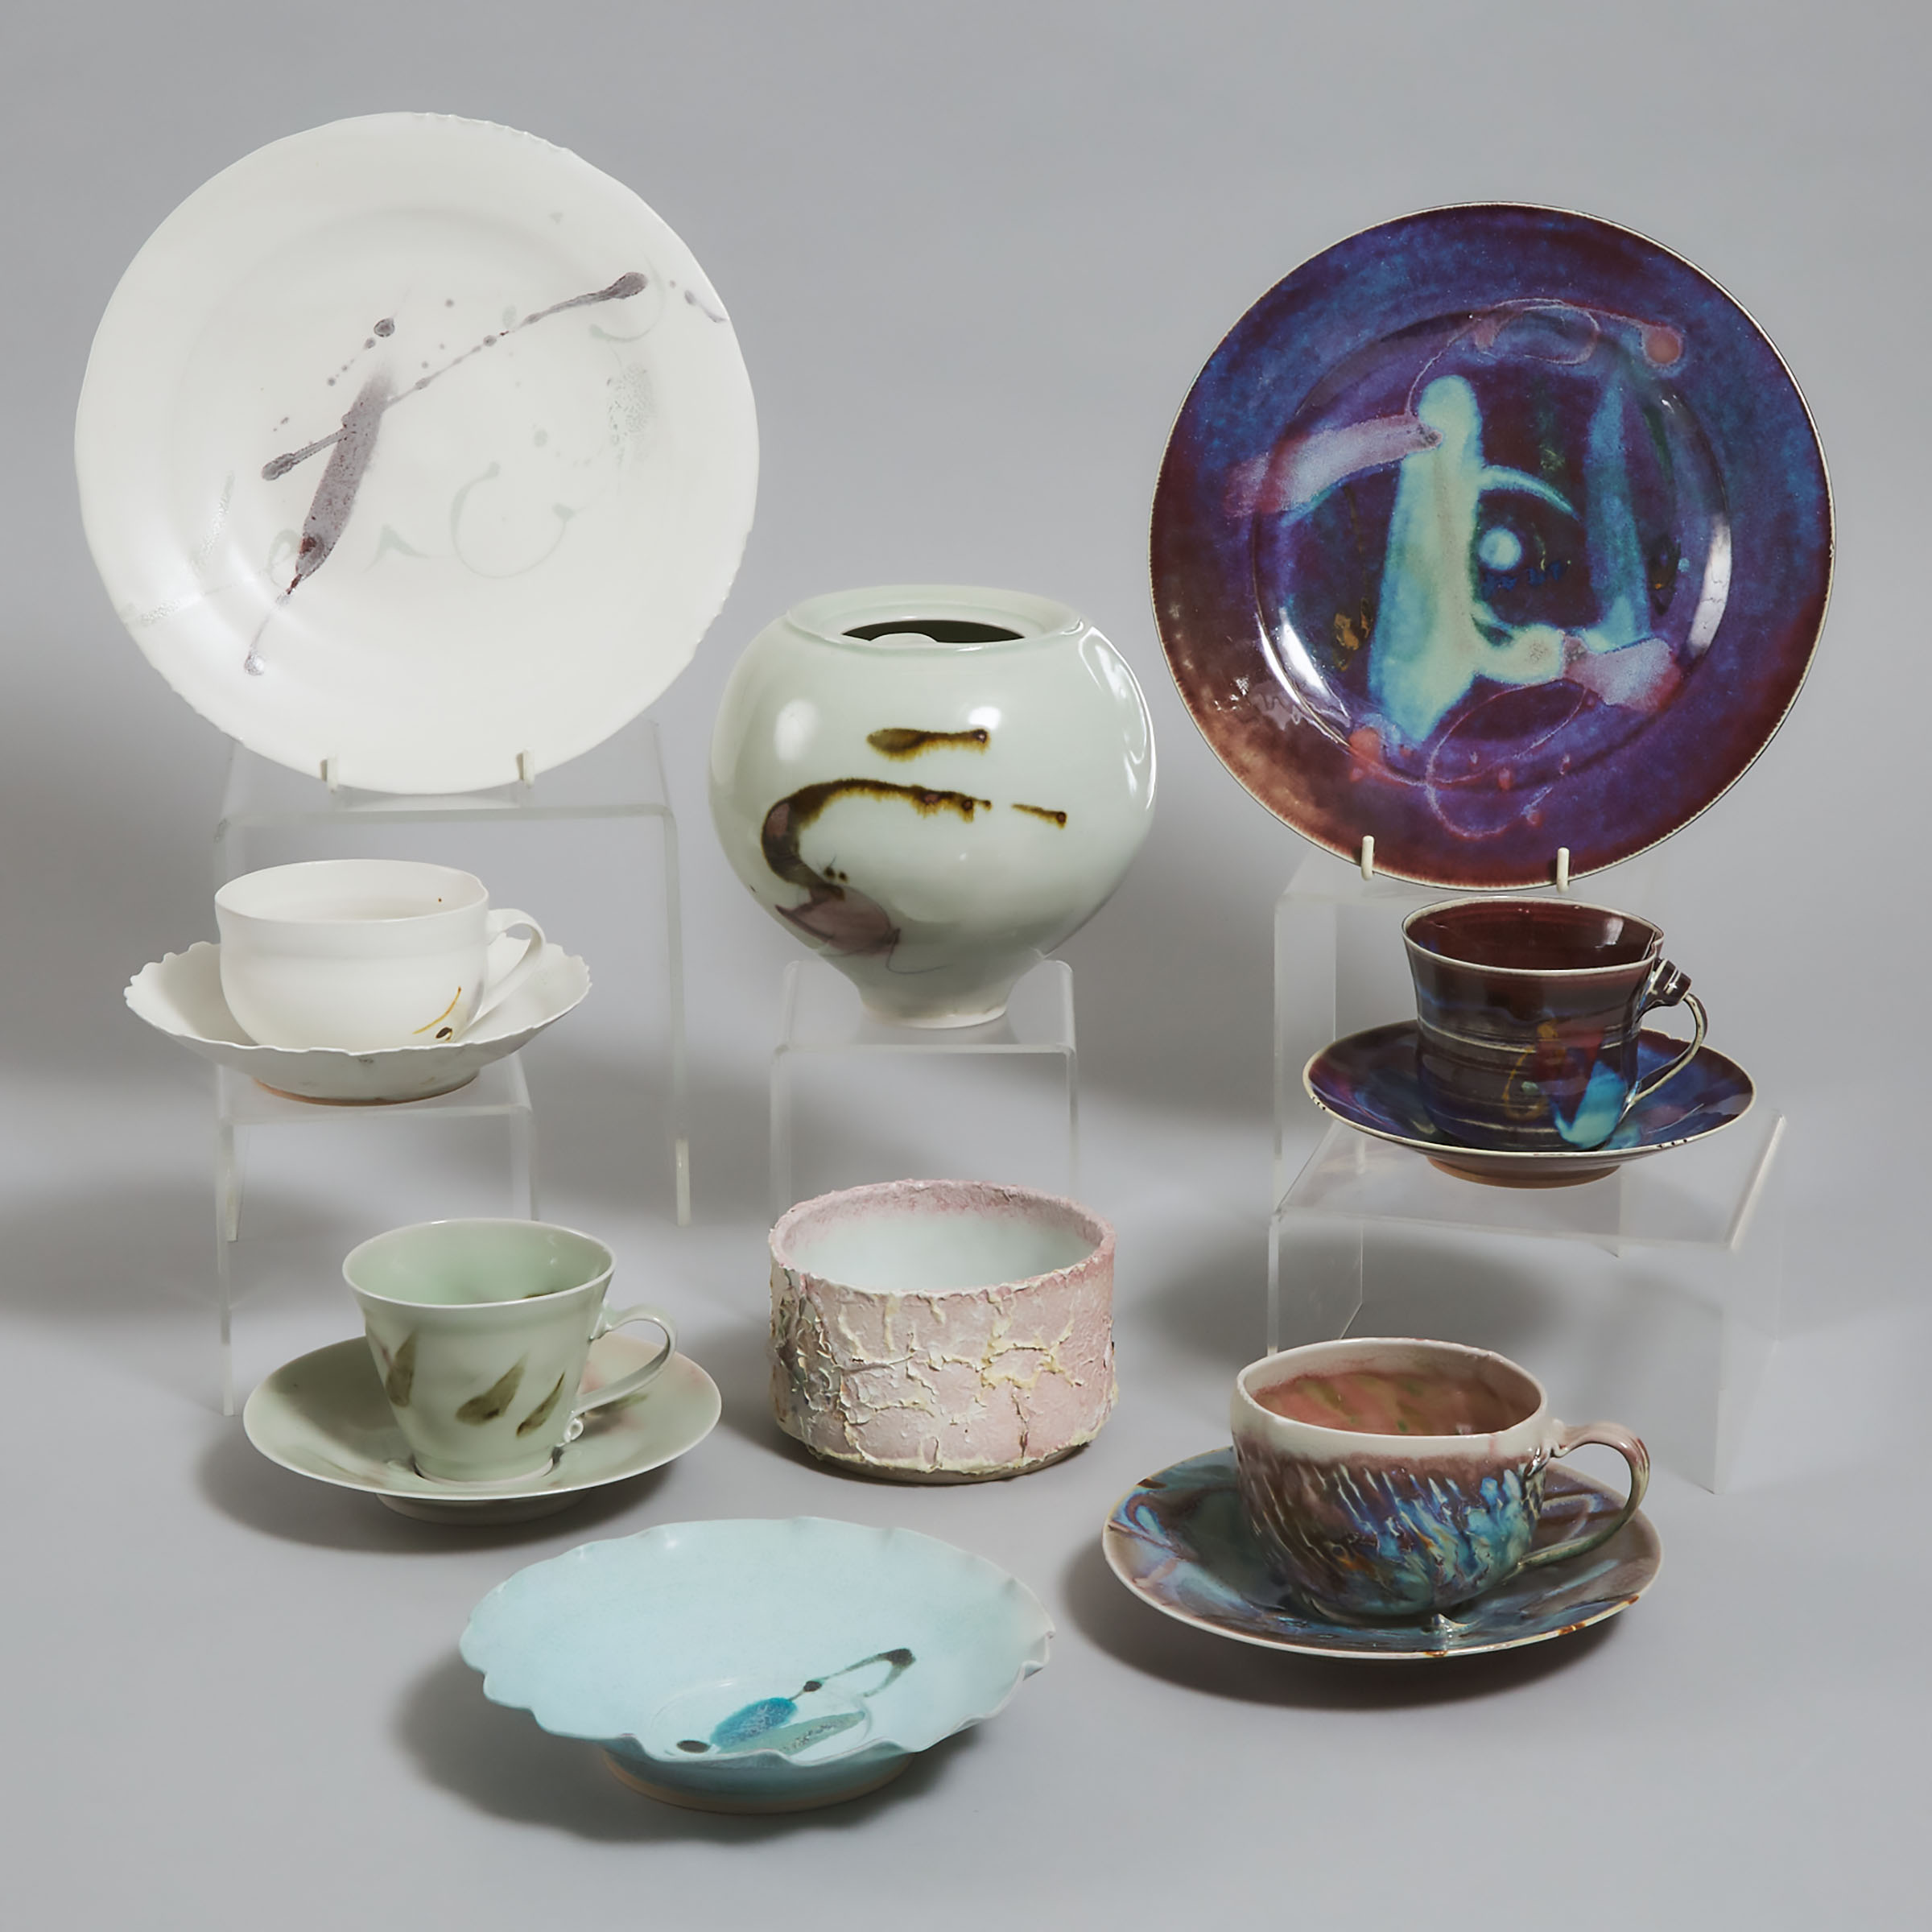 Kayo O'Young (Canadian, b.1950), Group of Porcelain Tablewares, 1990-2001